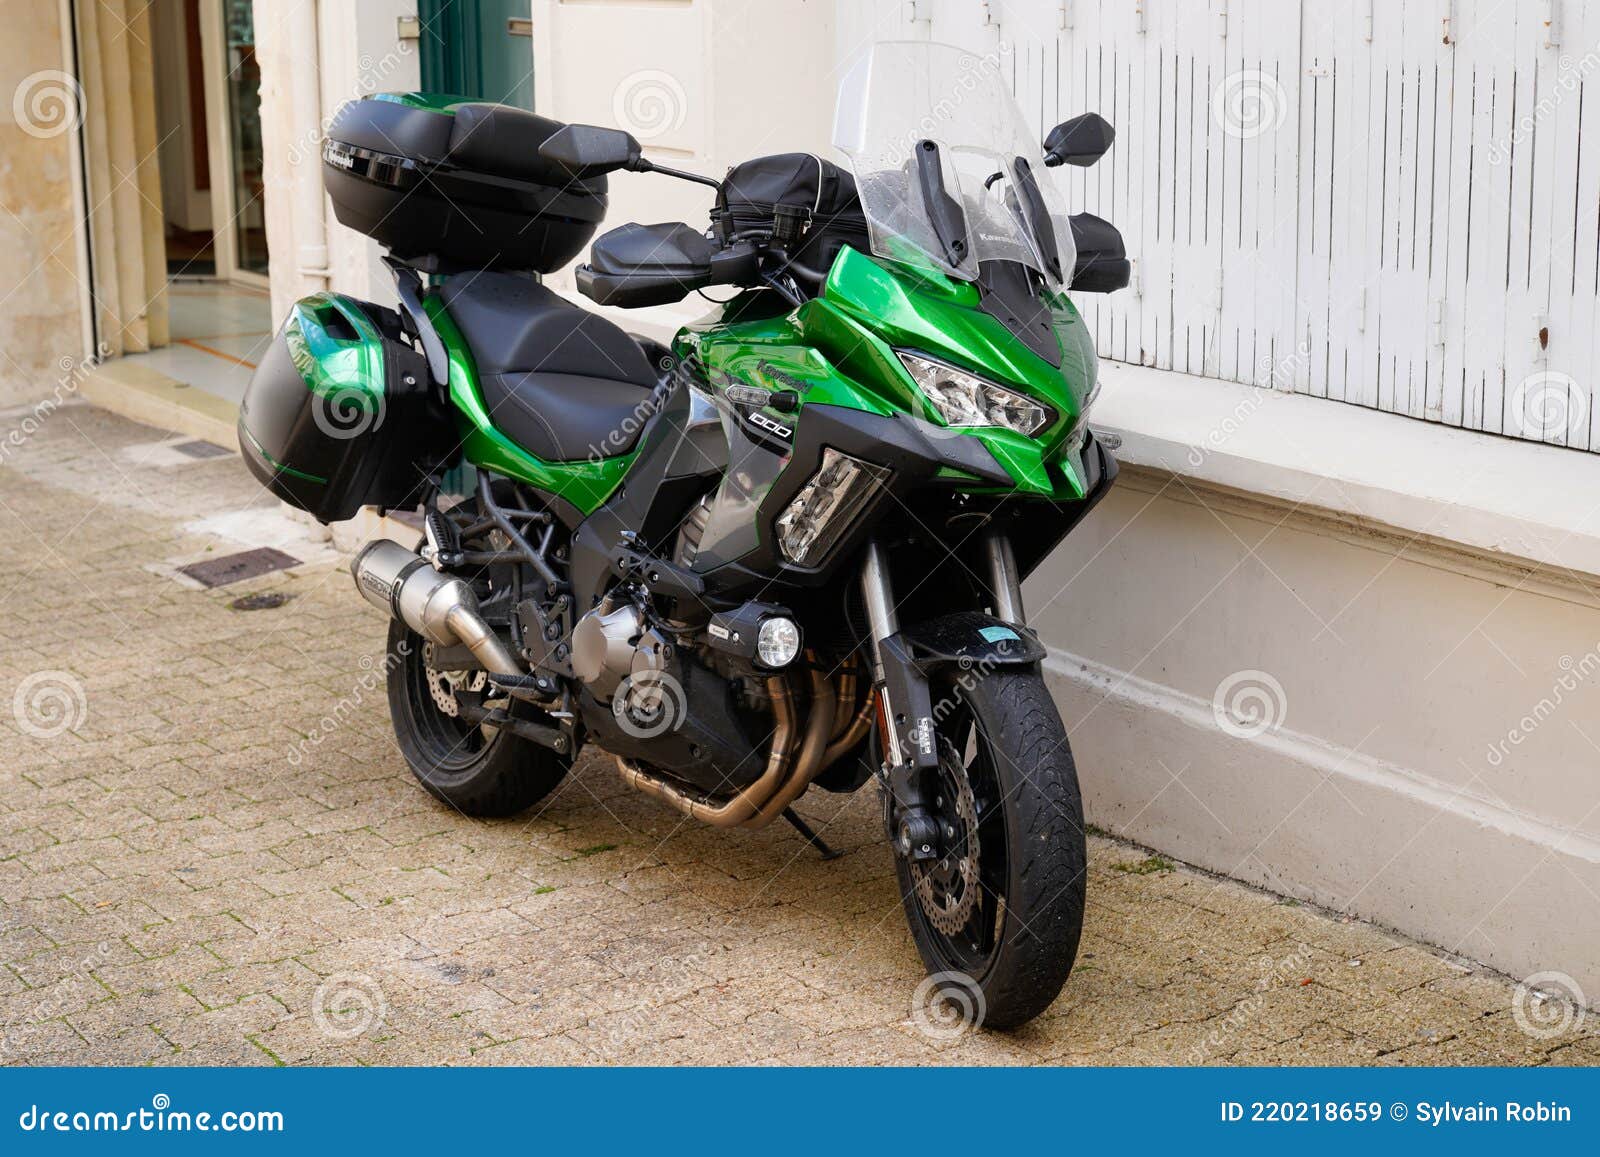 1000 Green Trail Gt Motorcycle Parked in Street City Editorial Stock Image - Image of design, brand: 220218659